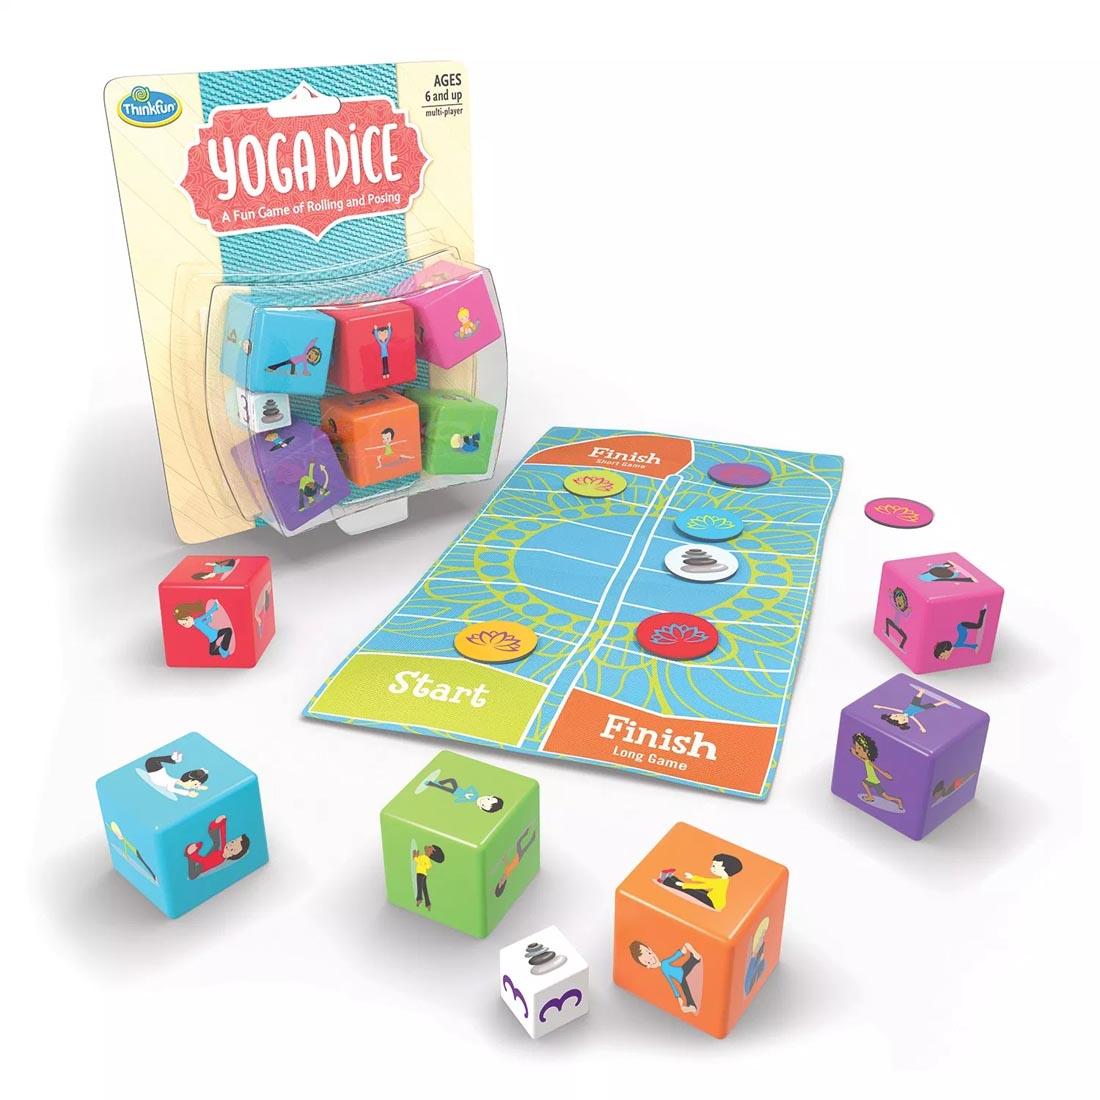 Yoga Dice Game shown both in and out of package